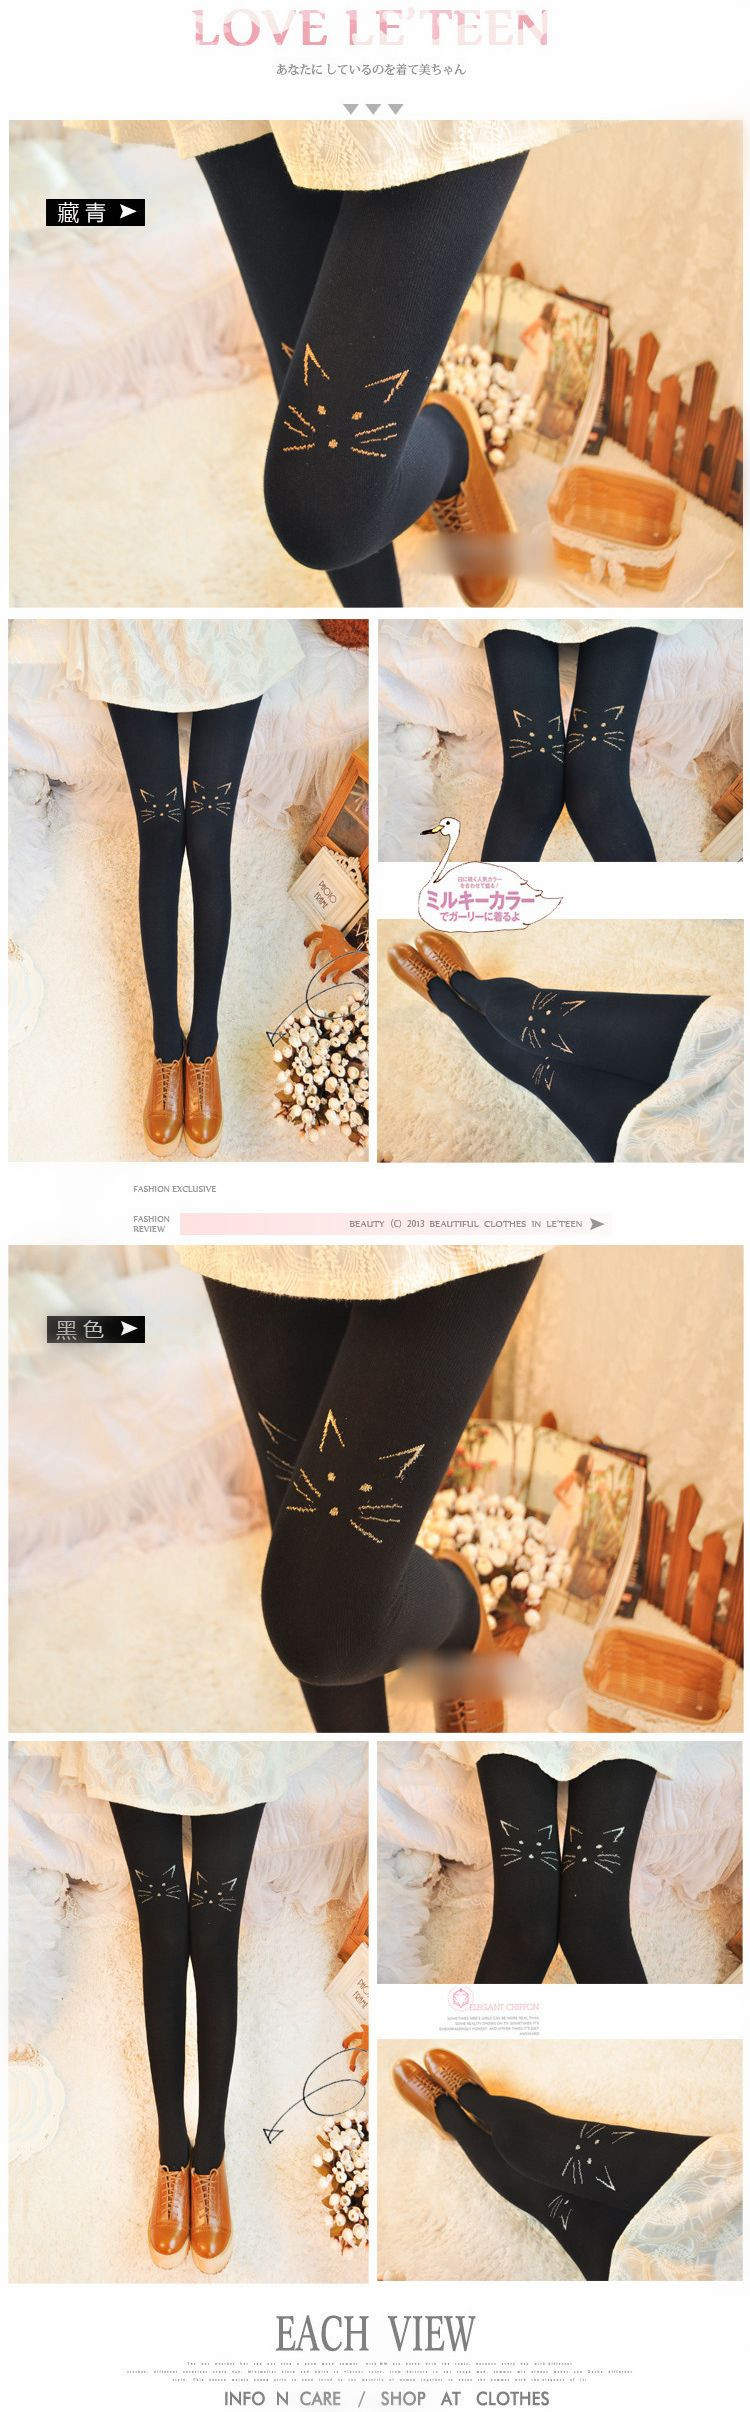 New Arrival Cotton Girls Print Cartoon Tights Japanese Filigree Embroidery Pantyhose Little Cat Stockings_3